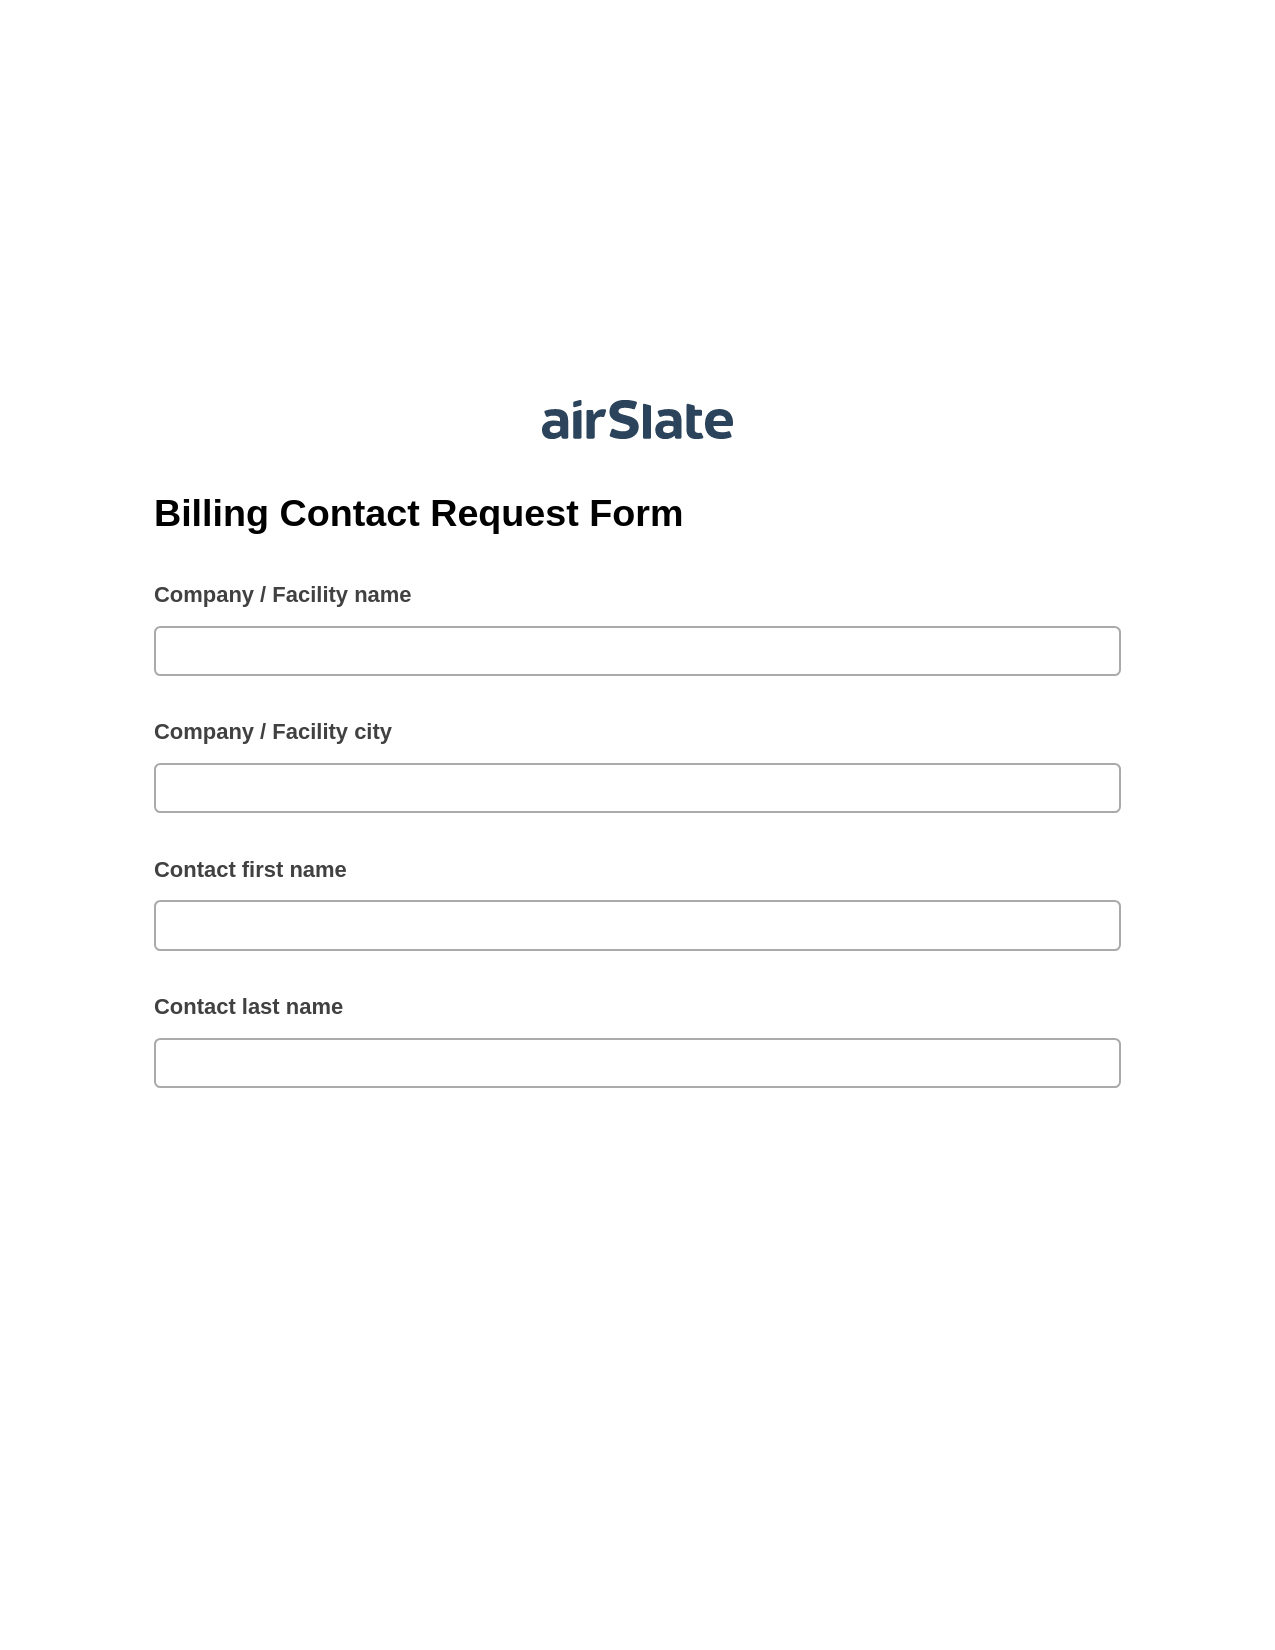 Multirole Billing Contact Request Form Pre-fill from another Slate Bot, Google Cloud Print Bot, Export to Smartsheet